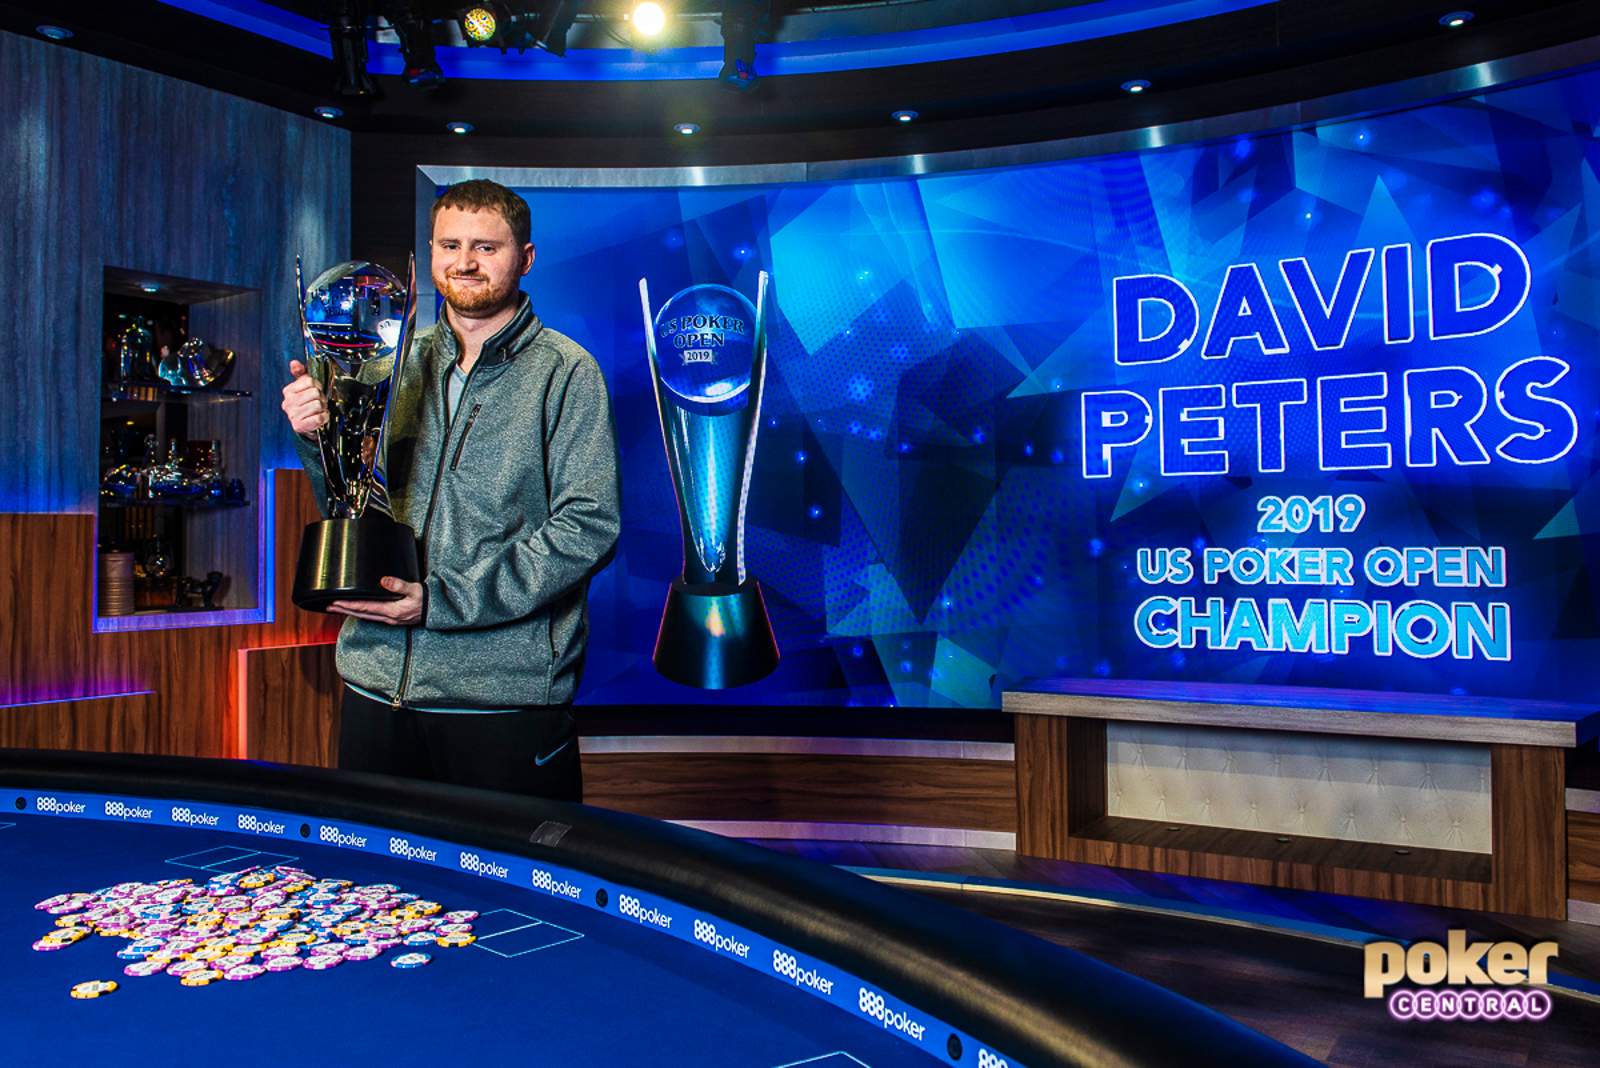 Relentlessly Dedicated and Competitive: David Peters Adds Another Marquee Win to His Poker Resume